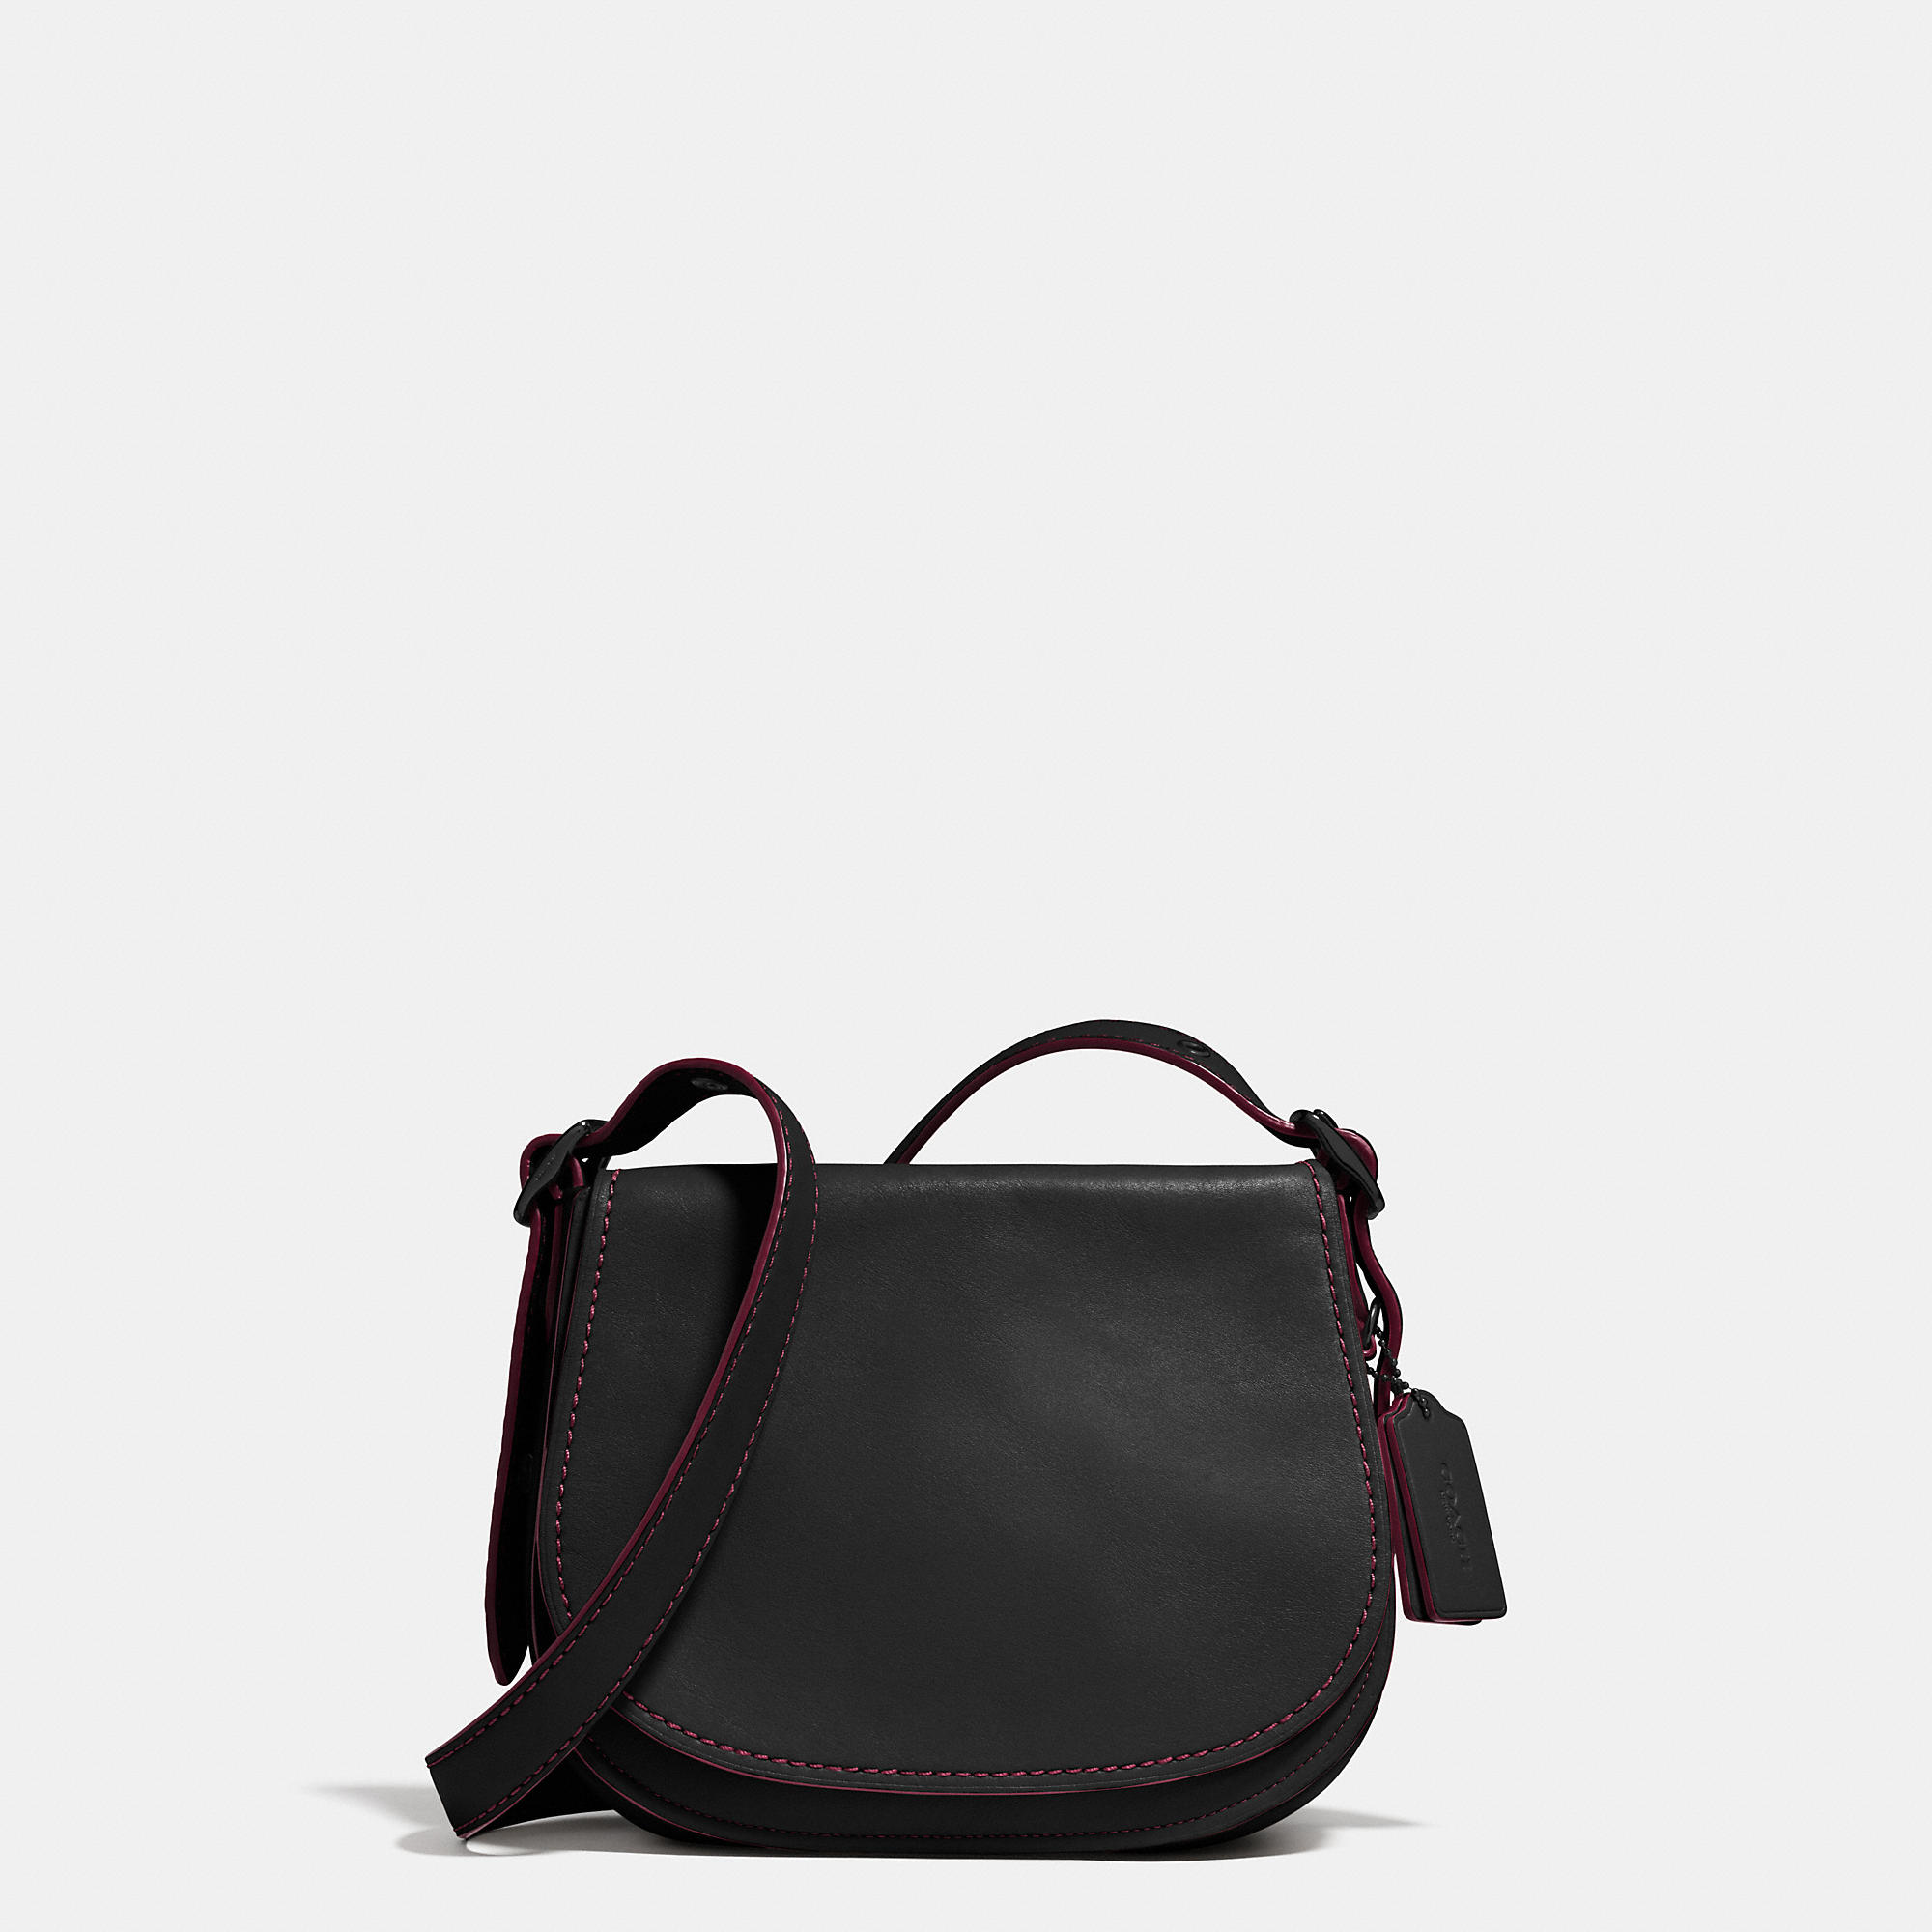 Top-Handle Bags Coach Saddle Bag 23 In Glovetanned Leather | Coach Outlet Canada